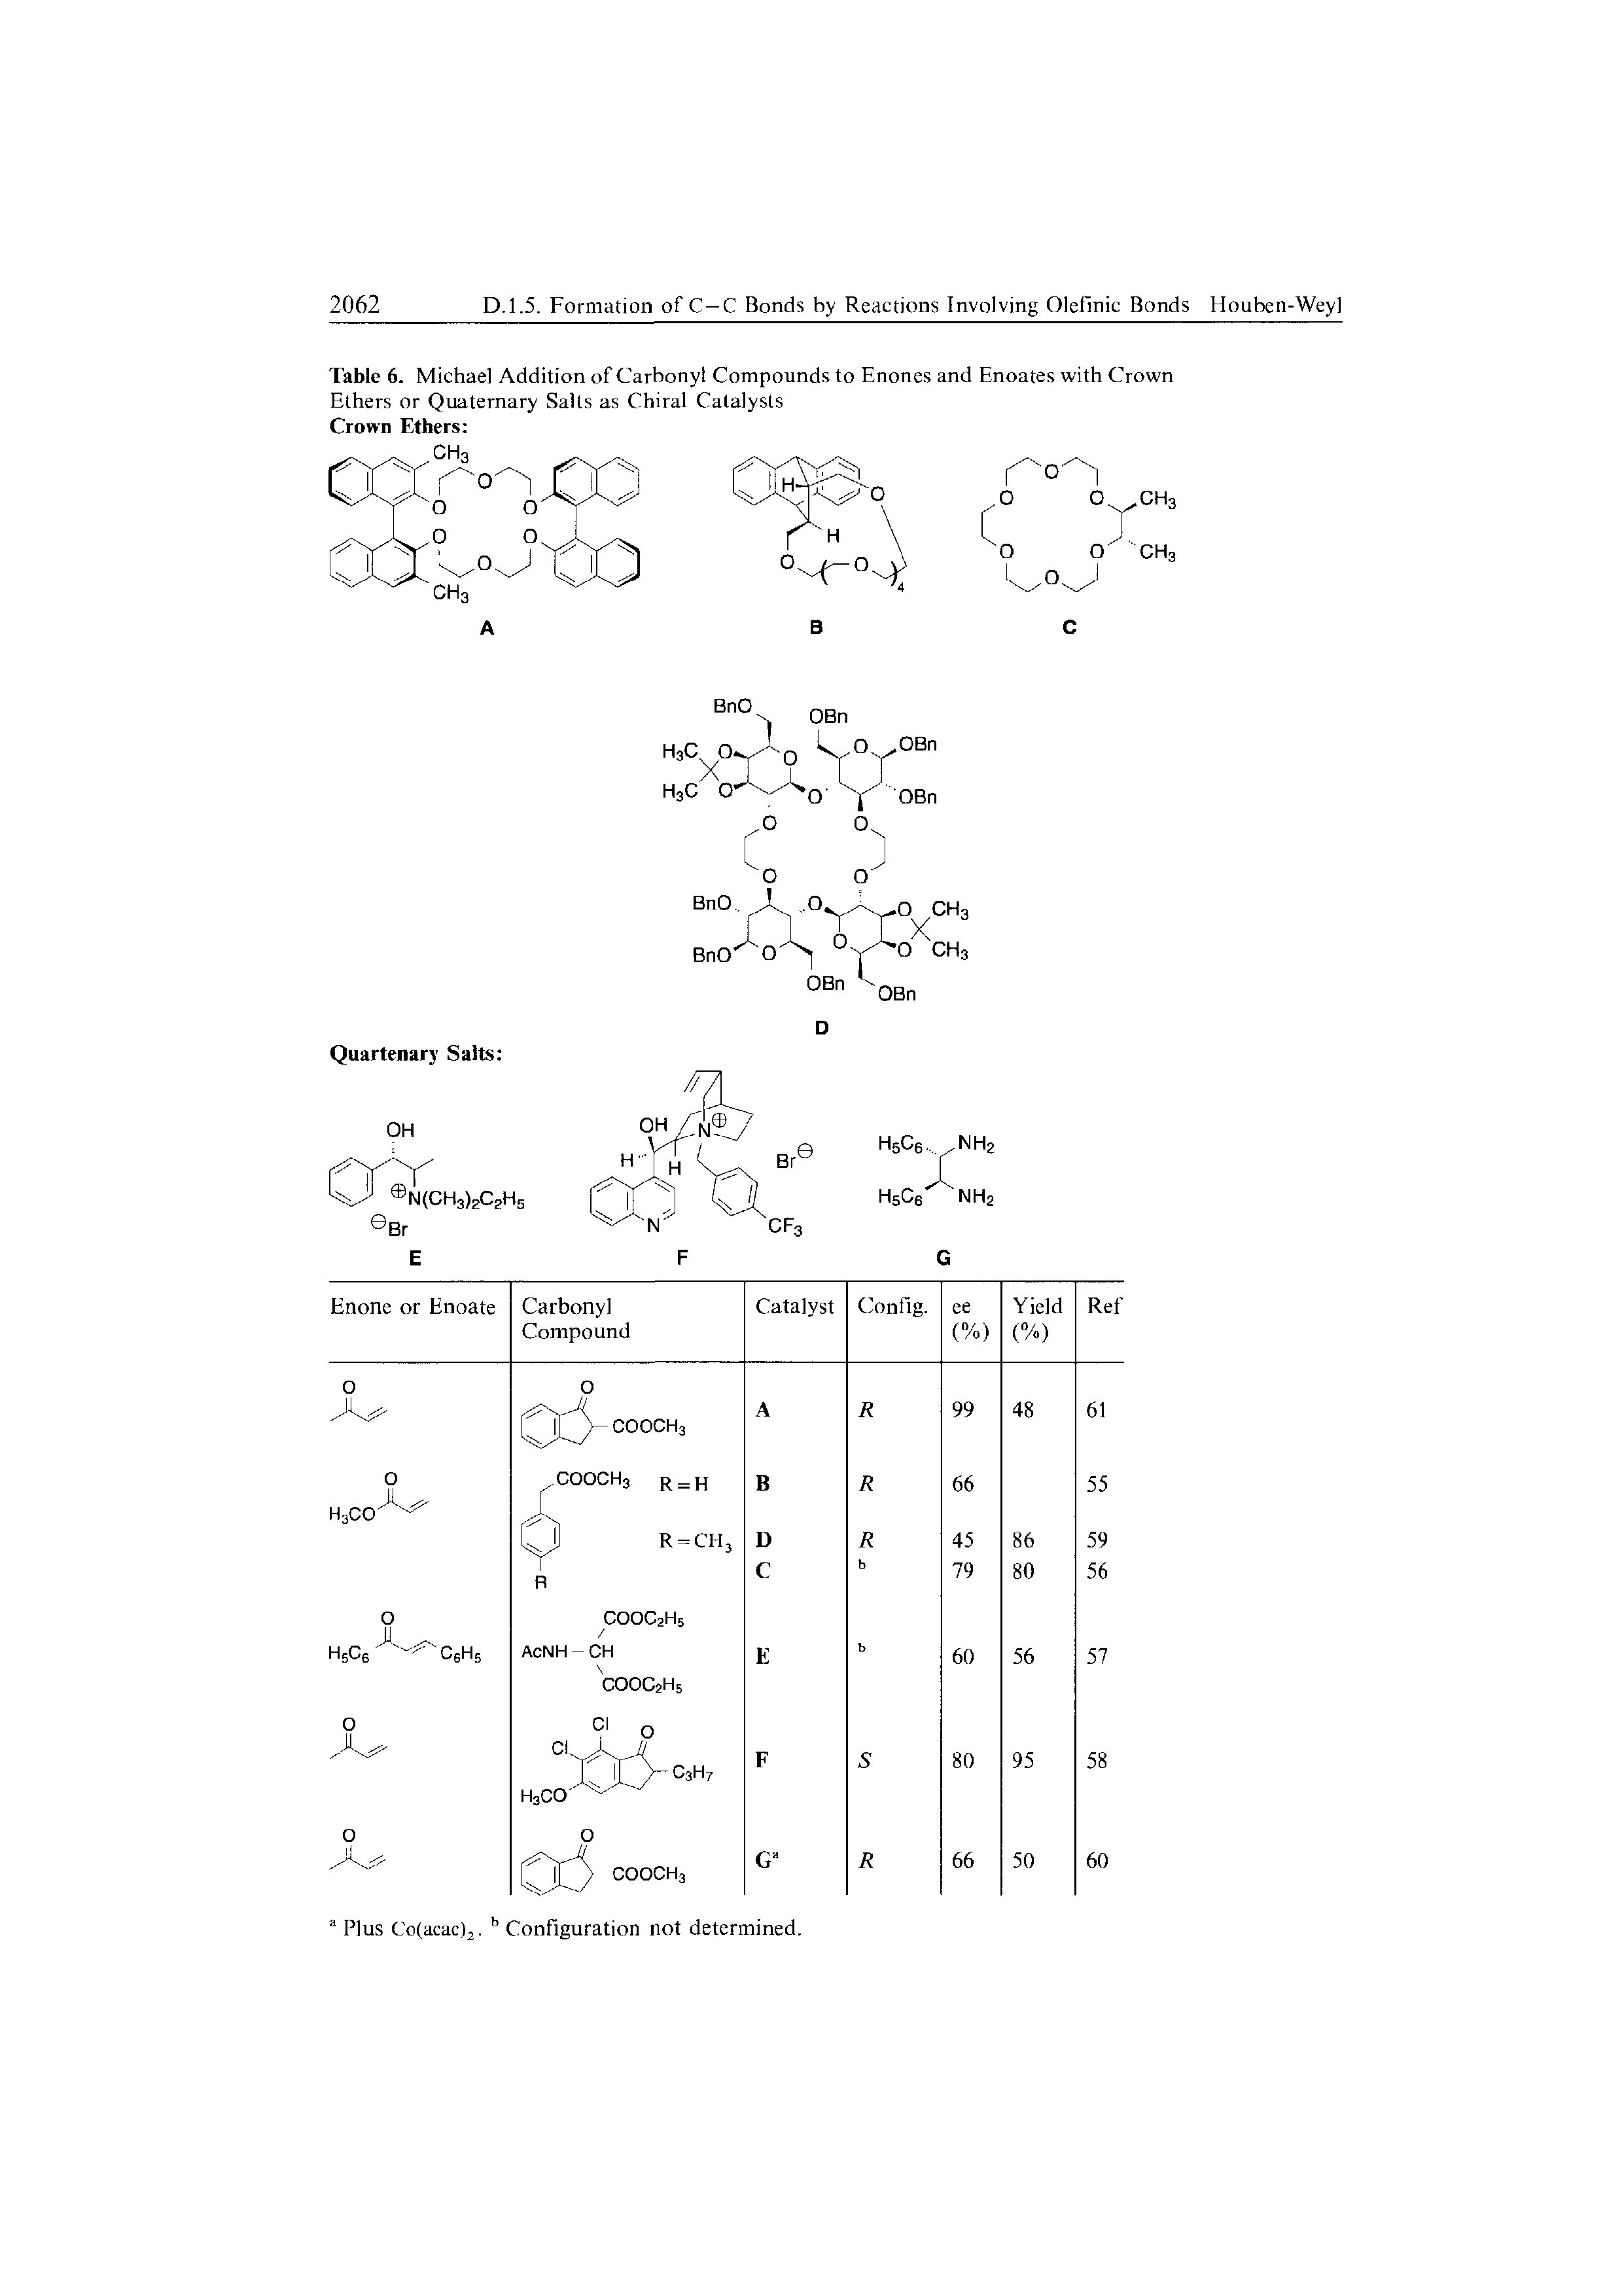 Table 6. Michael Addition of Carbonyl Compounds to Enones and Enoates with Crown Ethers or Quaternary Salts as Chiral Catalysts Crown Ethers ...